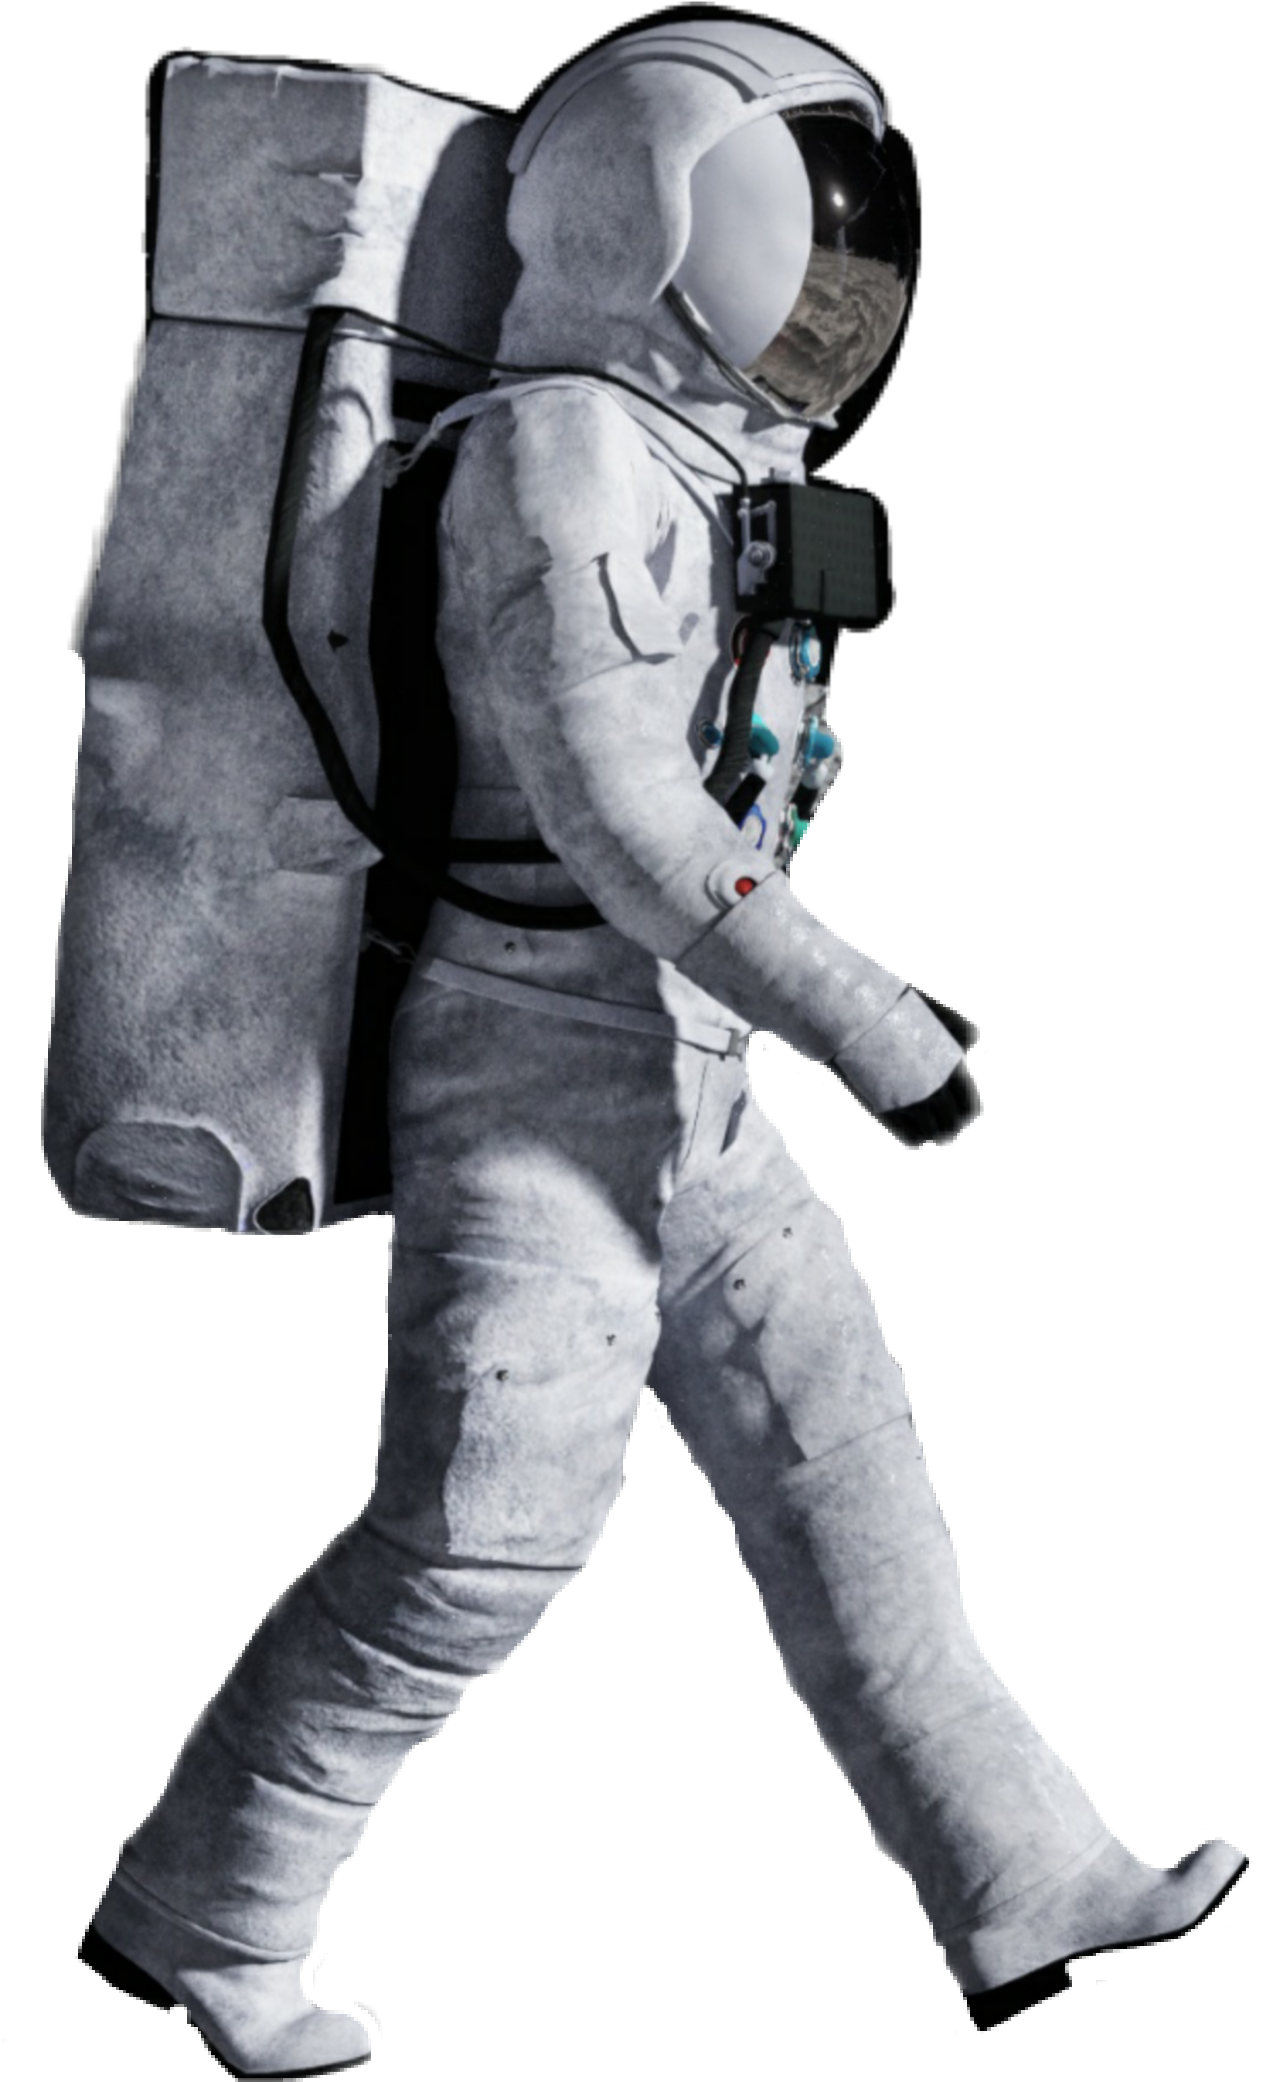 A Person In A Space Suit